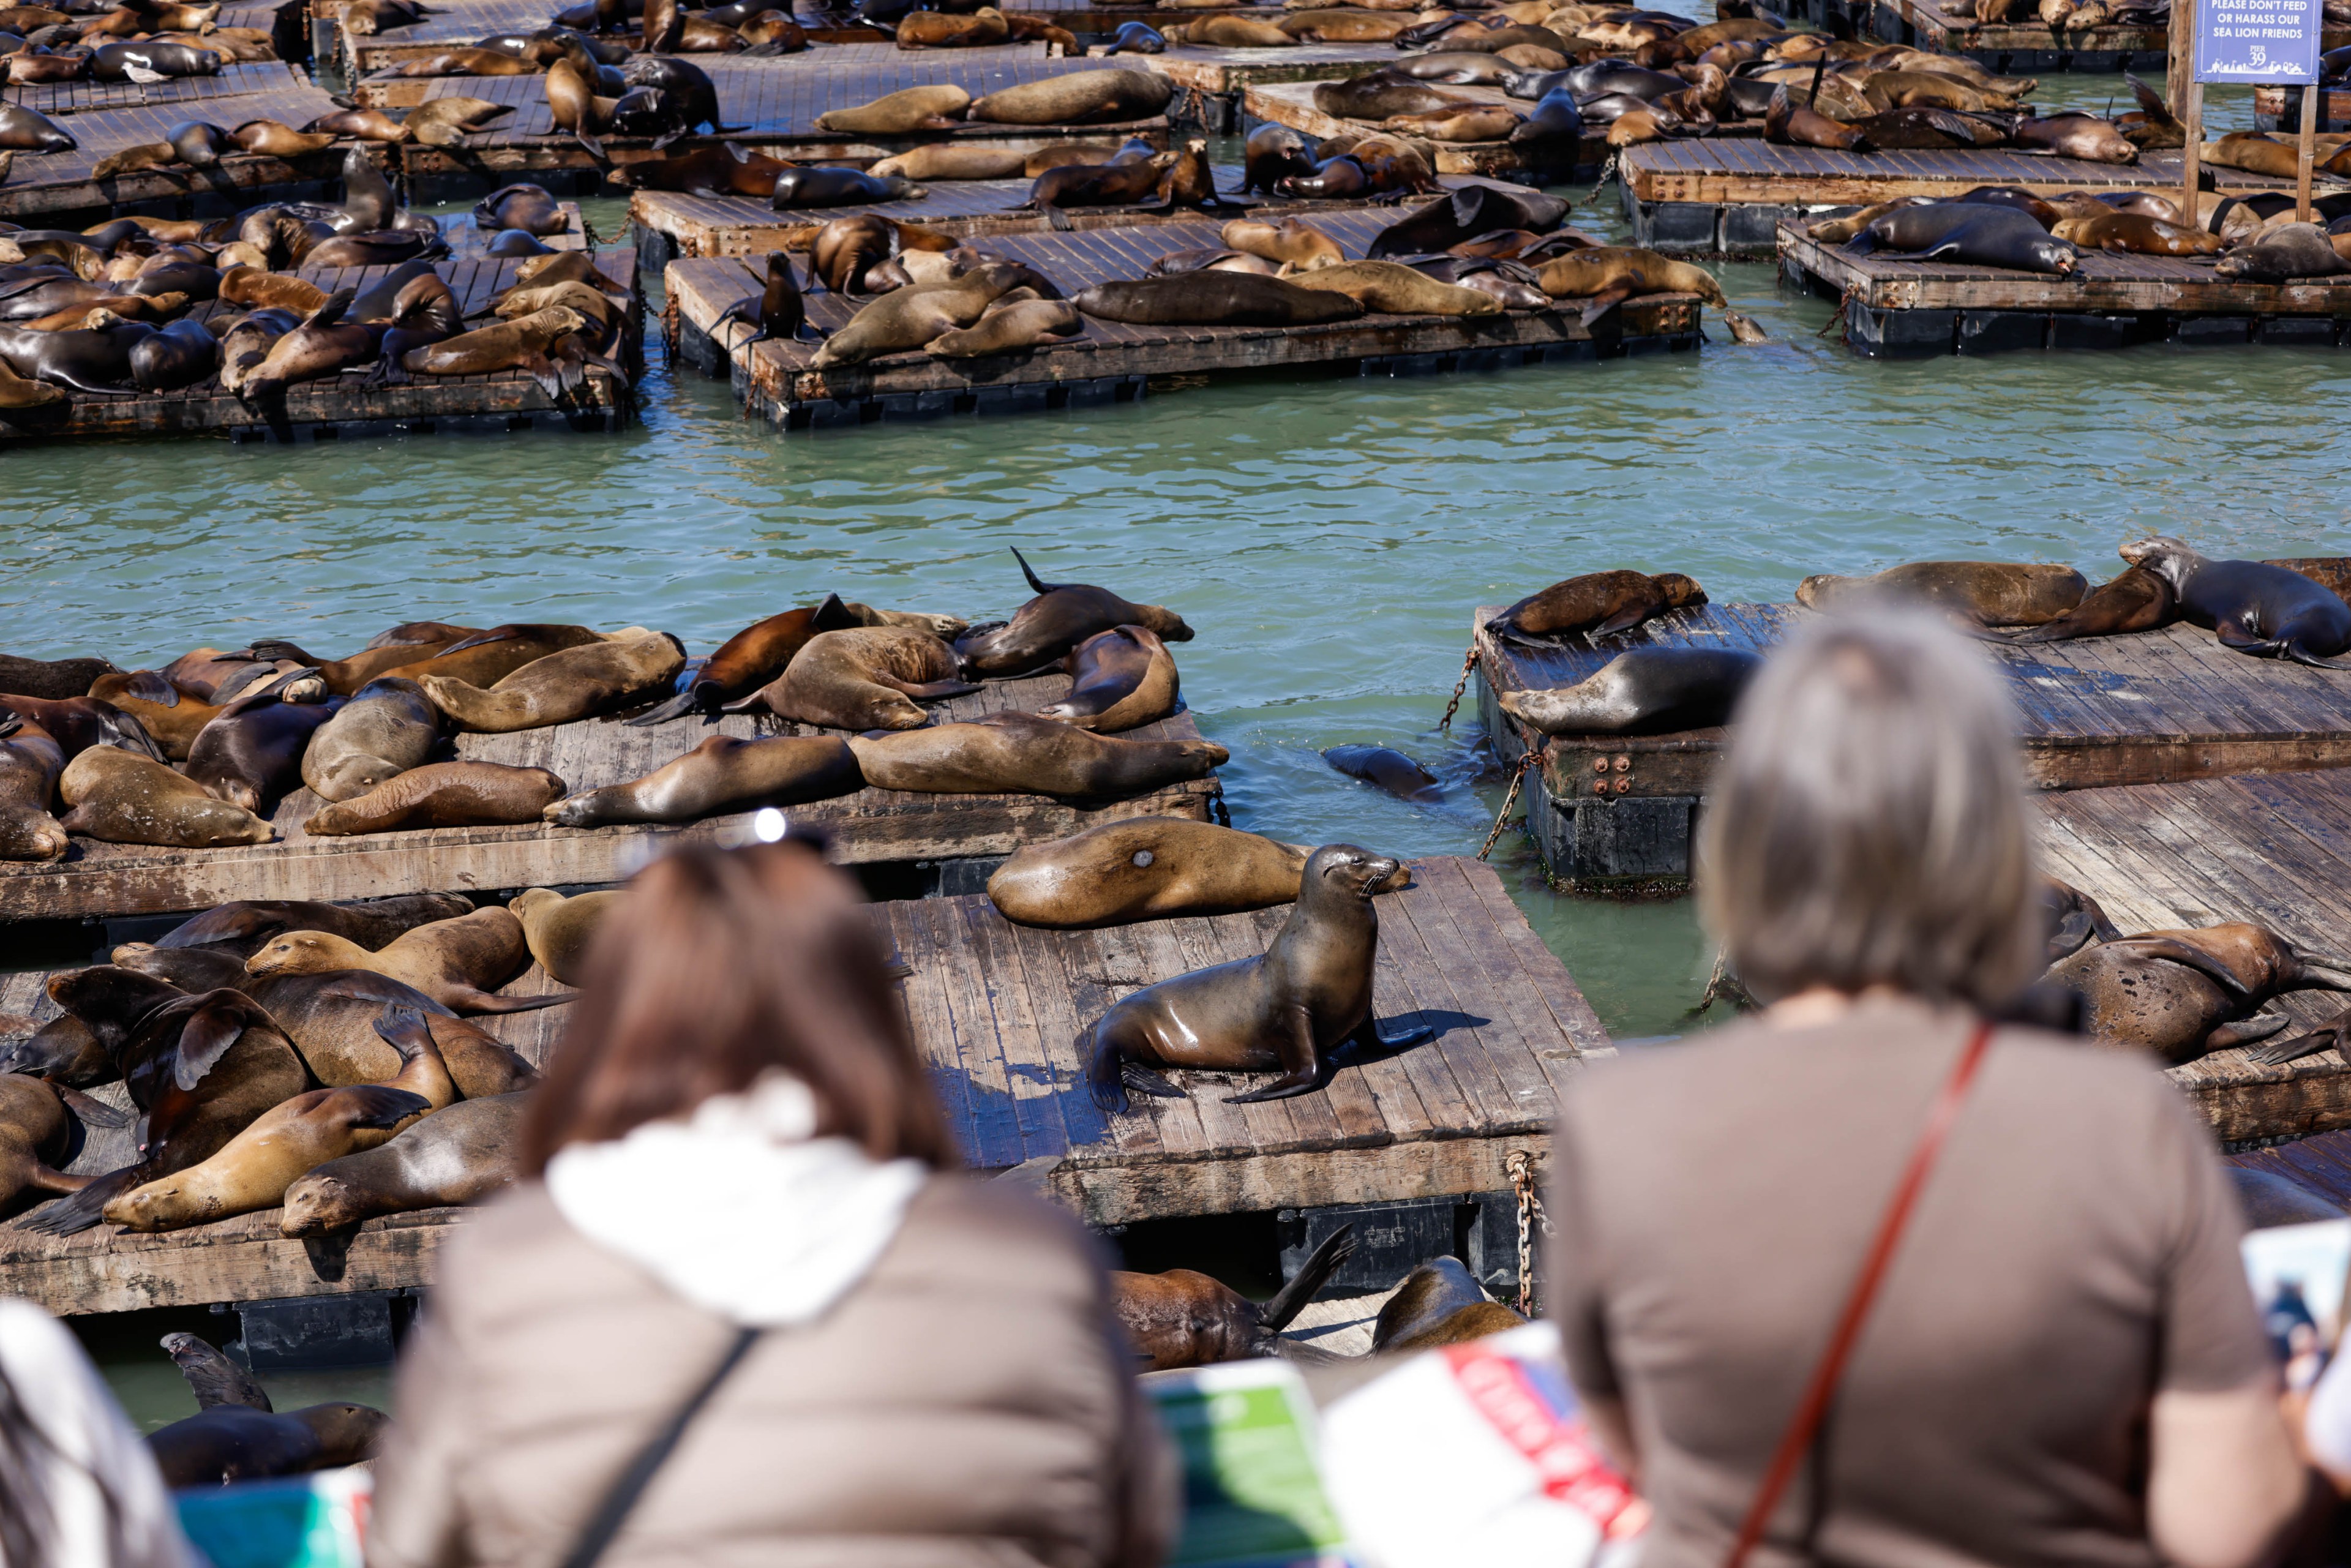 Two people observe a crowded dock of basking sea lions near green waters.